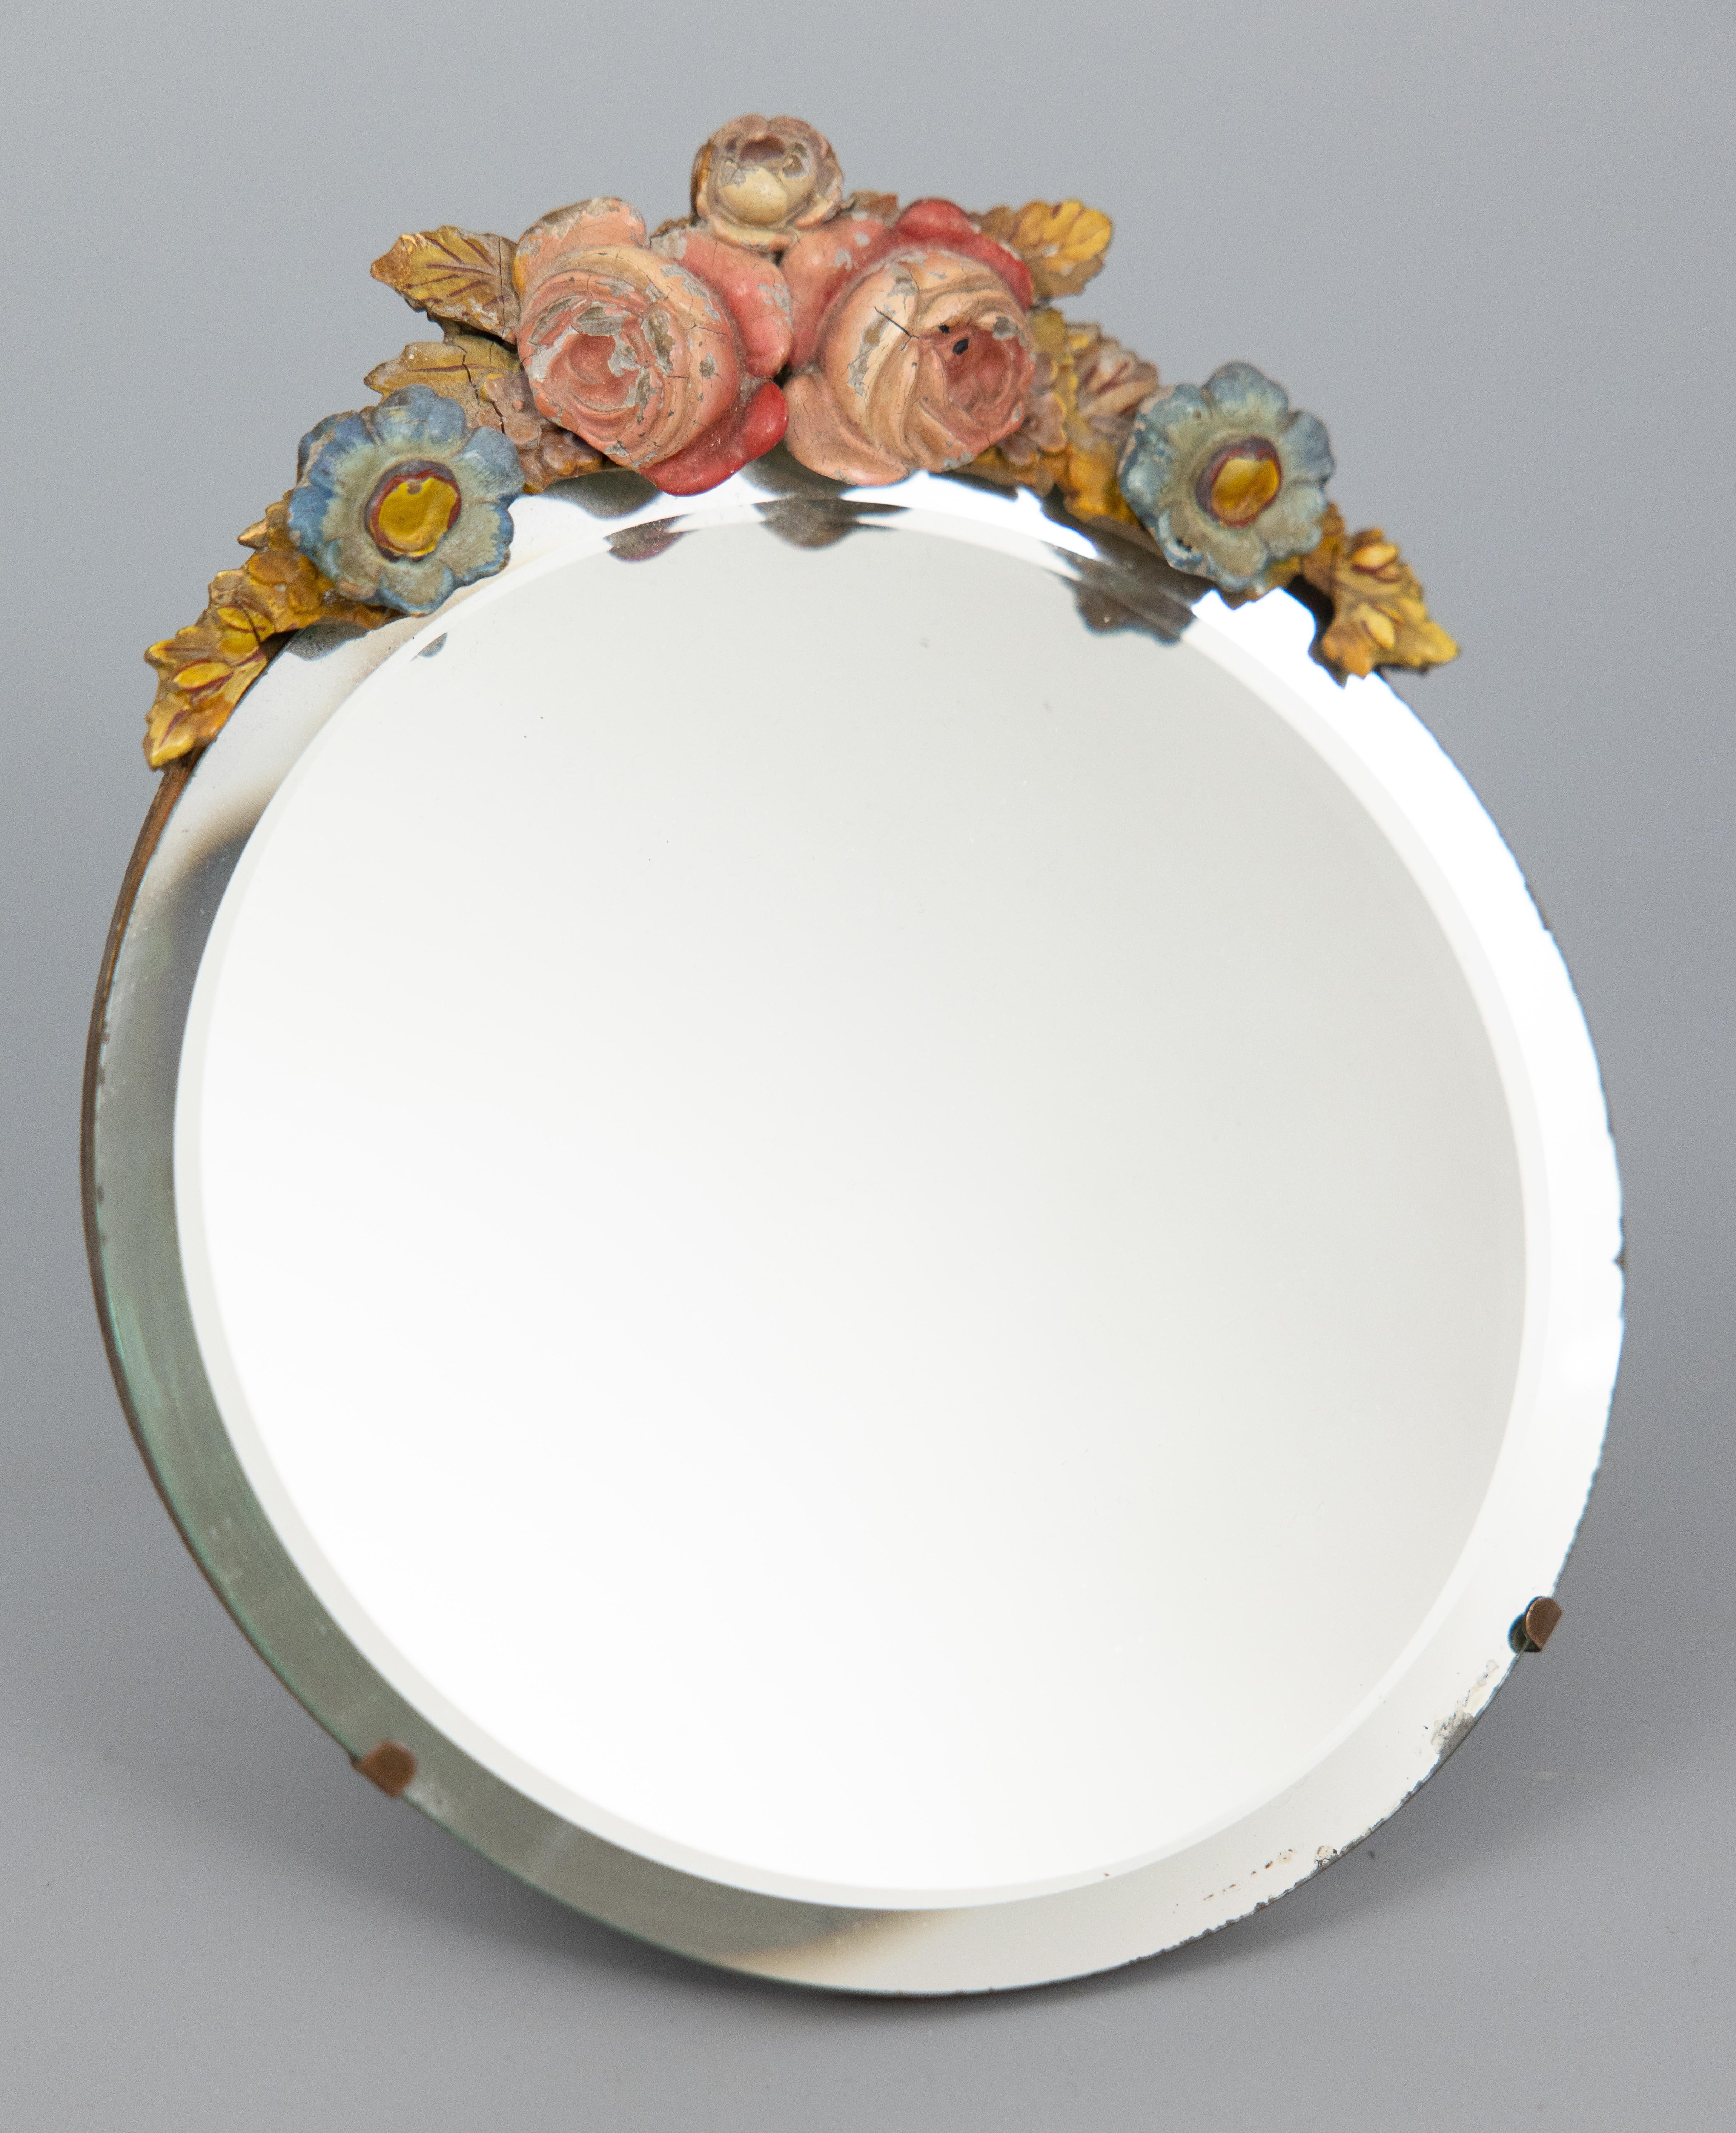 A fine antique English barbola dressing table or vanity oval mirror with easel, circa 1920. This beautiful mirror has beveled glass and is crowned with a gesso floral swag. It would be lovely displayed on a dresser, vanity, or small desk.